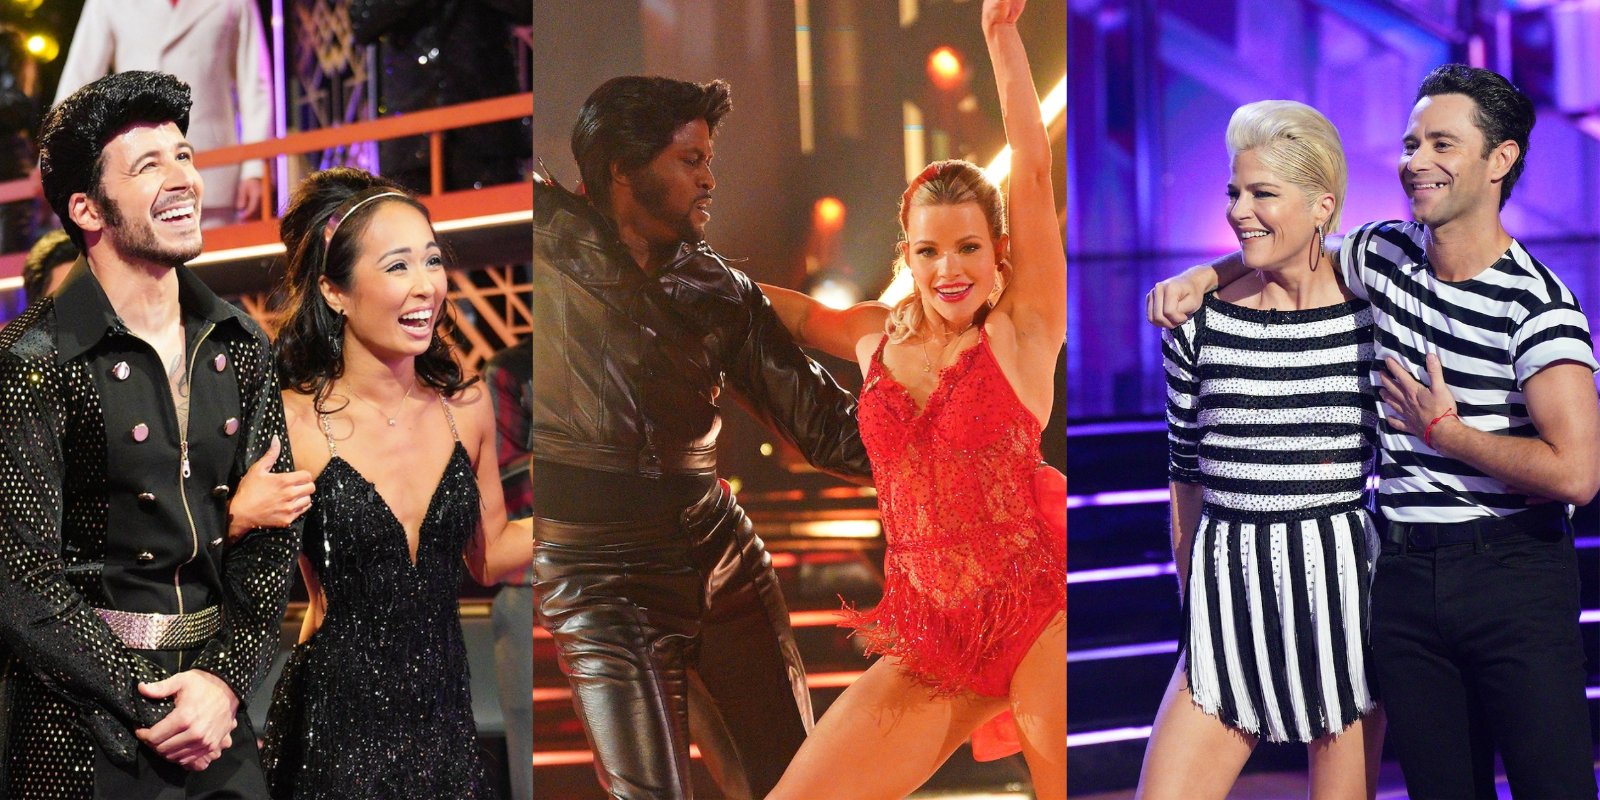 ‘Dancing With the Stars’ Fans Beg for the End of ‘Ridiculous’ Theme Nights as Show Teases Tribute to James Bond 007